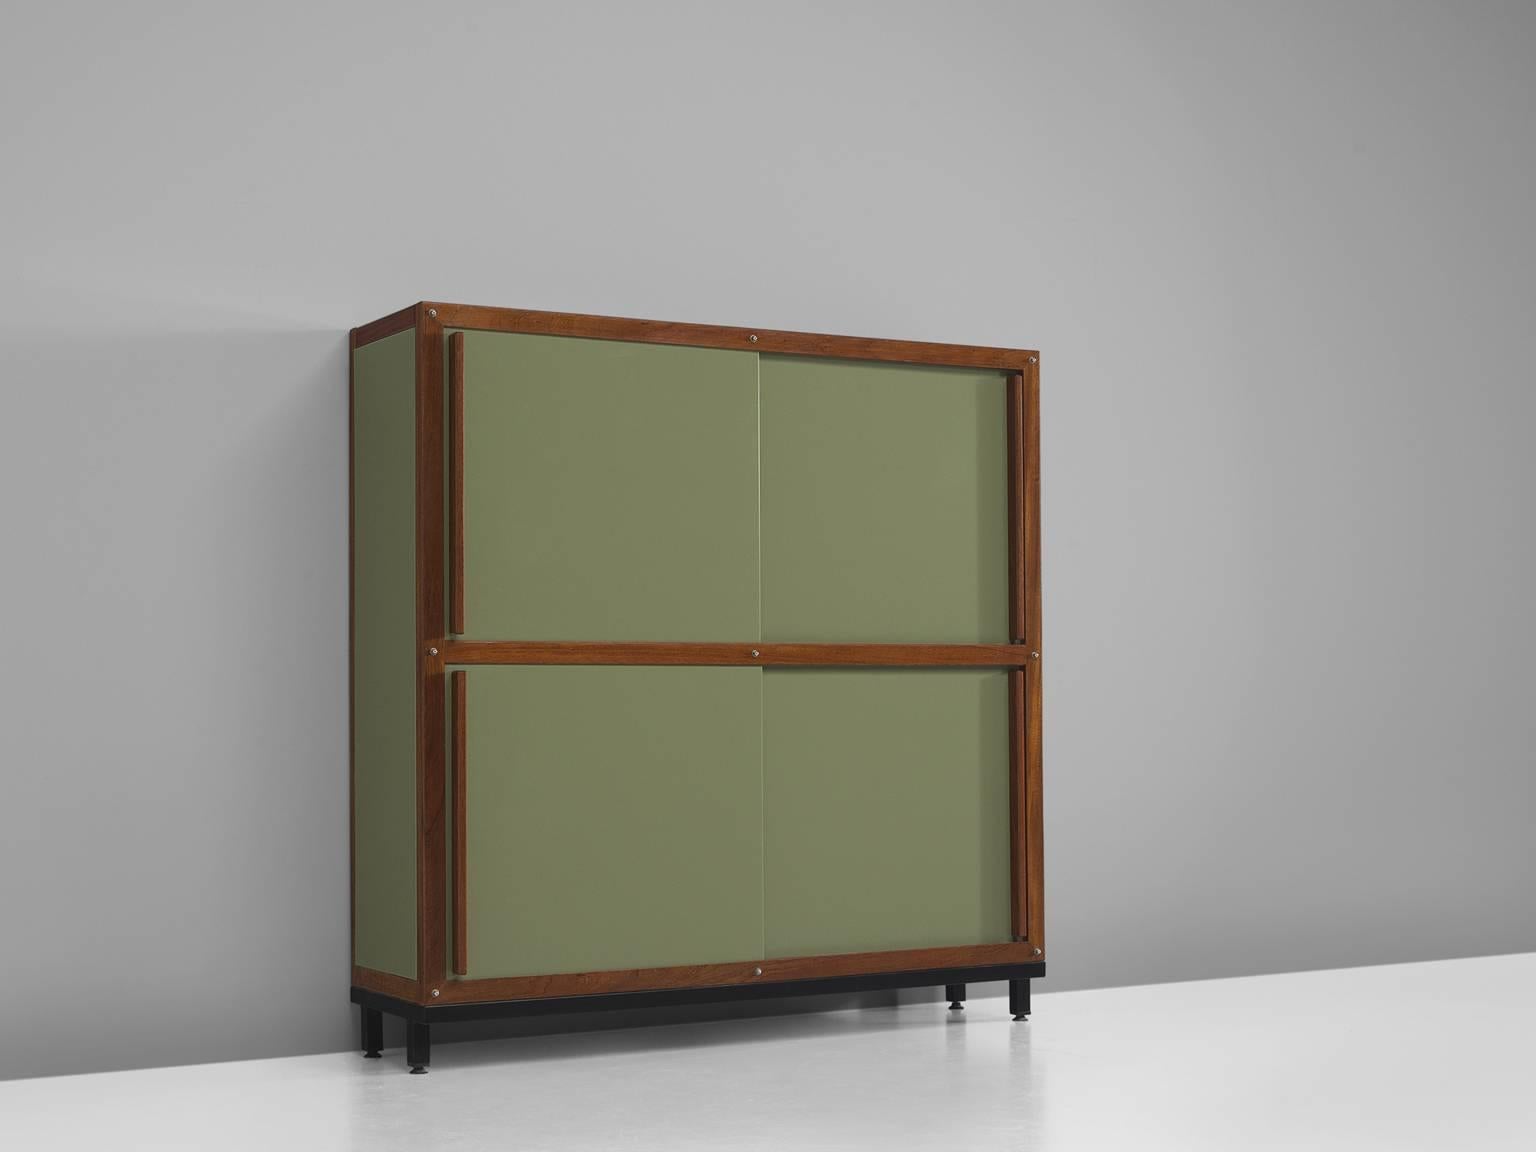 Cabinet with two sliding doors, plywood and teak, France, 1950s

Large cabinet with two doors that can opened on both levels. Thus creating a playful and versatile piece of furniture. Very simple yet original in its design. The colours of the